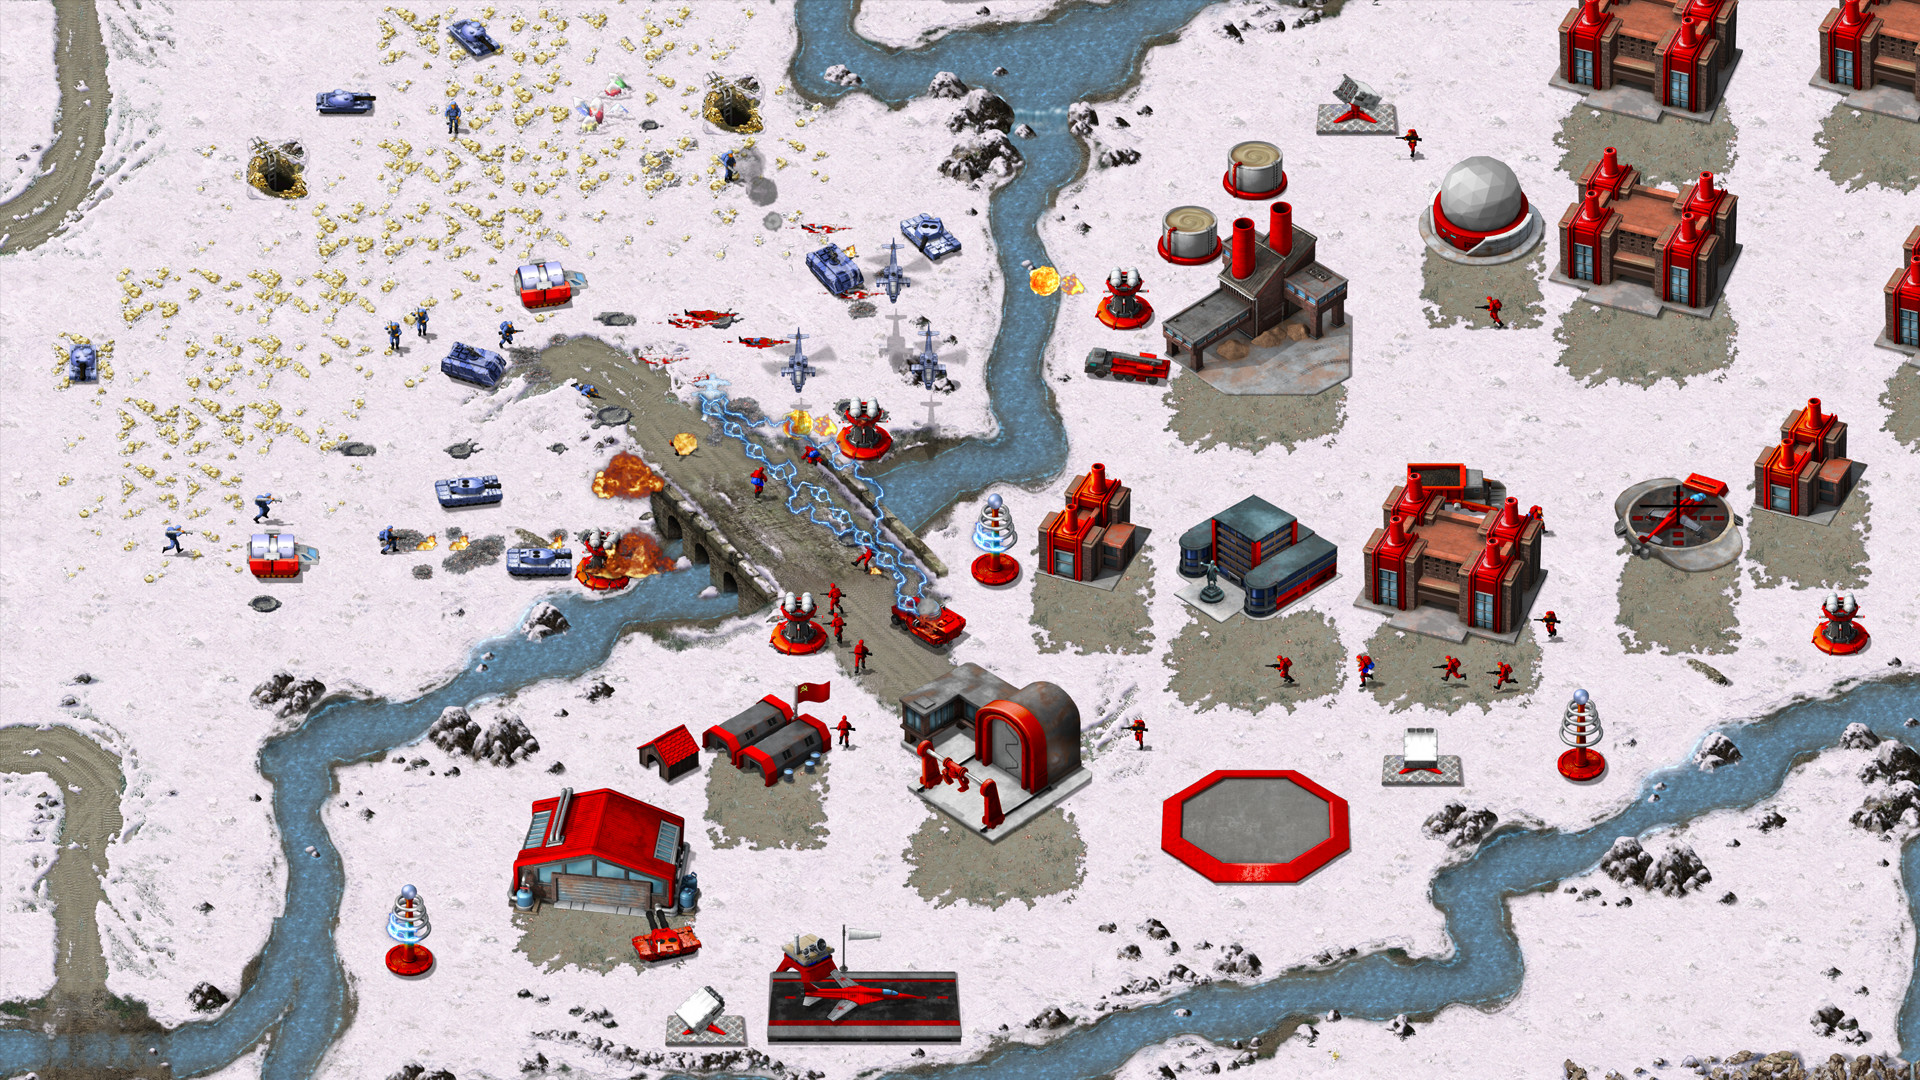 guy-playing-command-conquer-red-alert-23-years-ago-i-feel-your-pain-pc-gamer